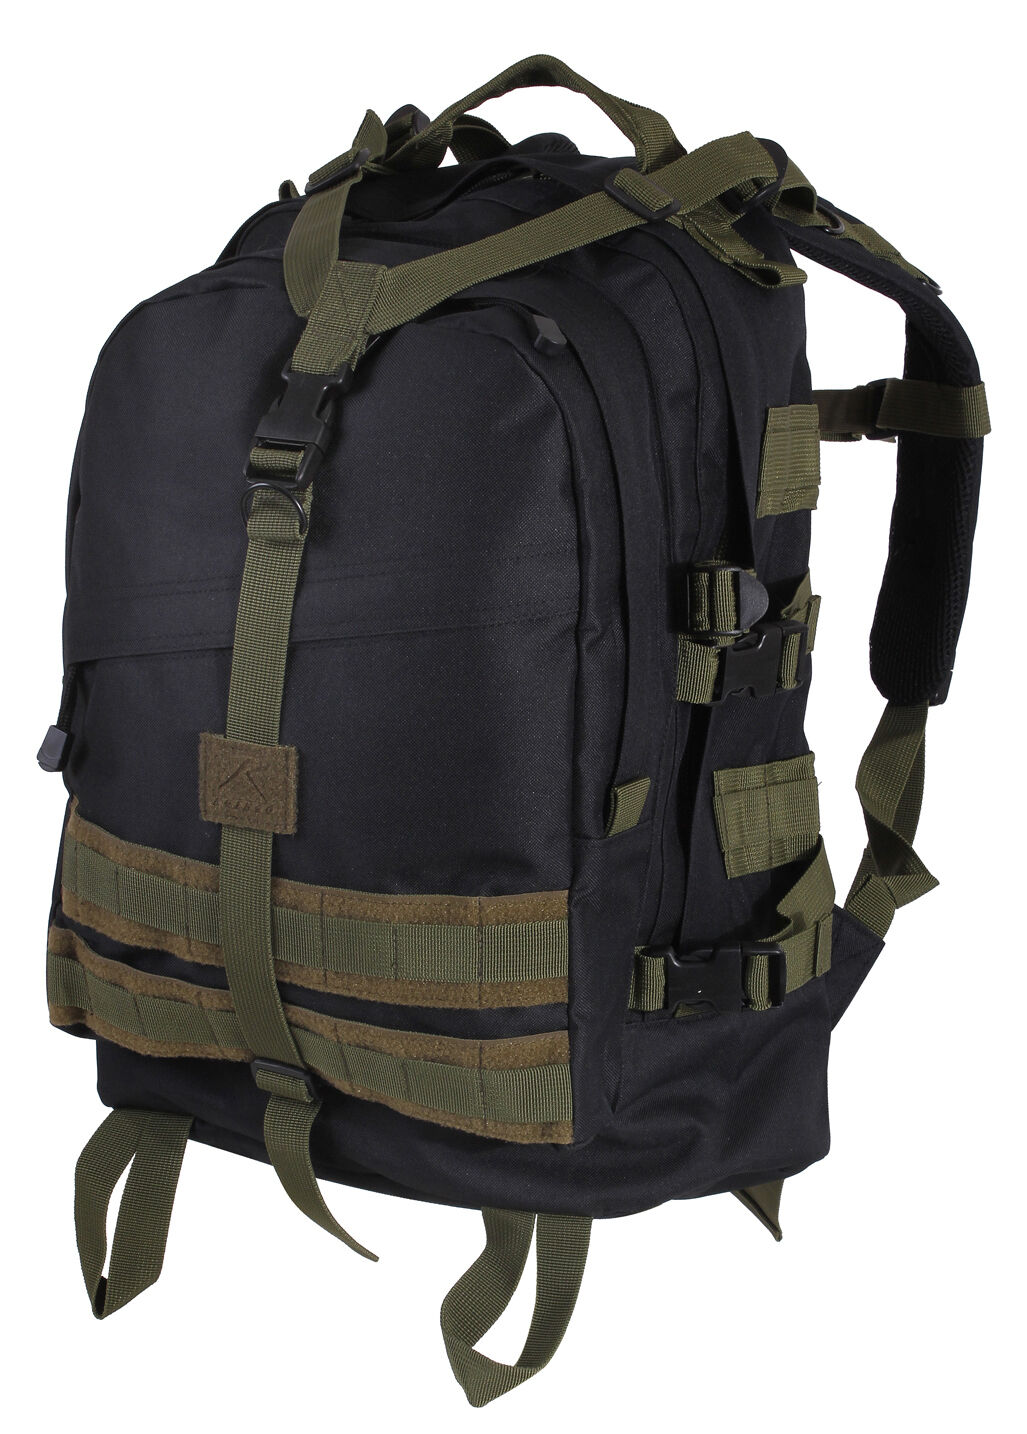 Rothco Large Transport Pack - Black and Olive Drab